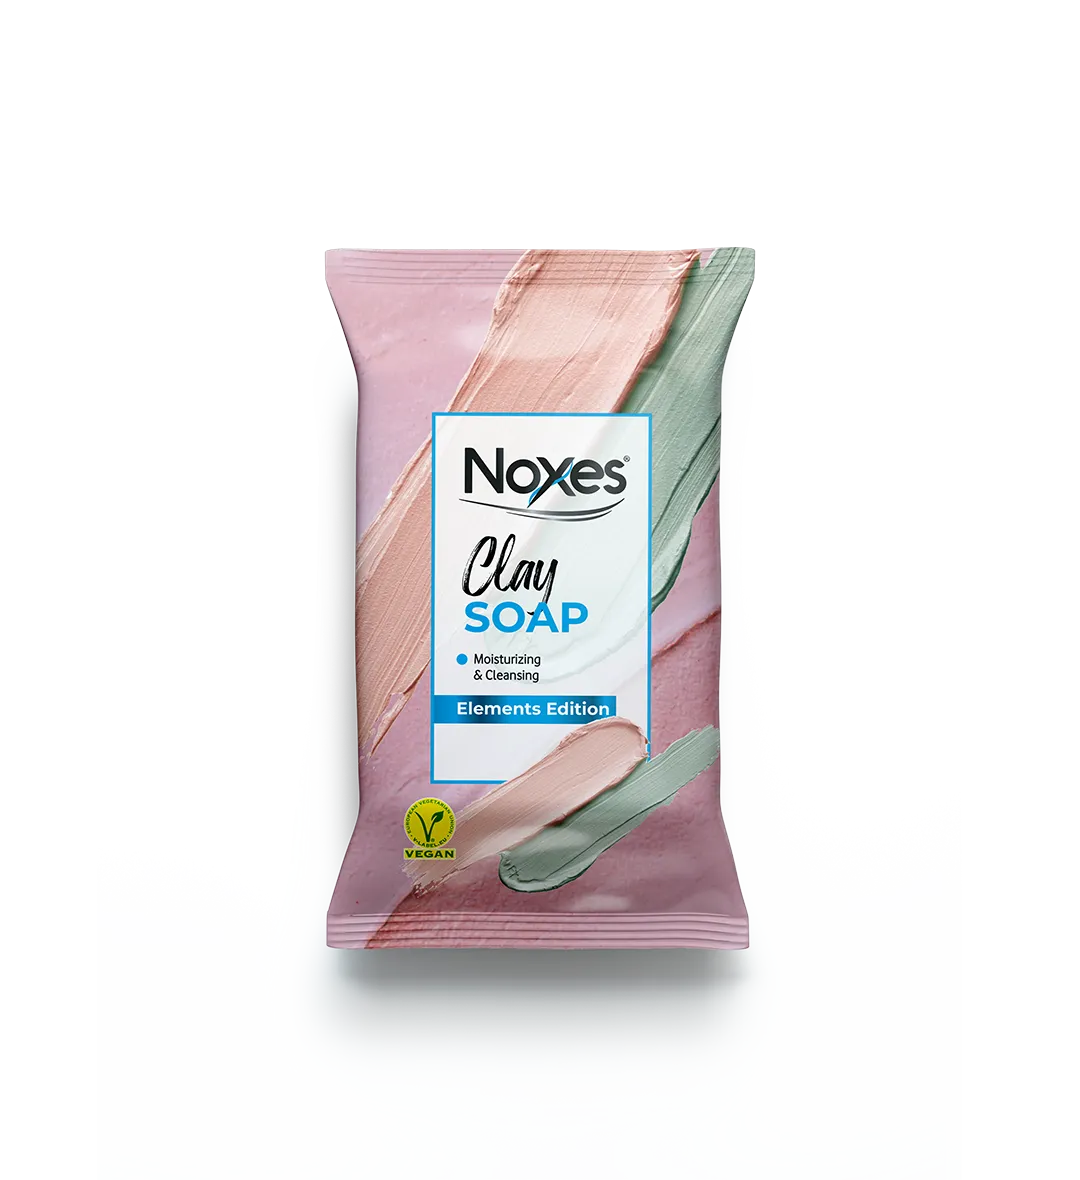 NOXES 100 GR FLOWPACK ELEMENTS EDITION CLAY SOAP